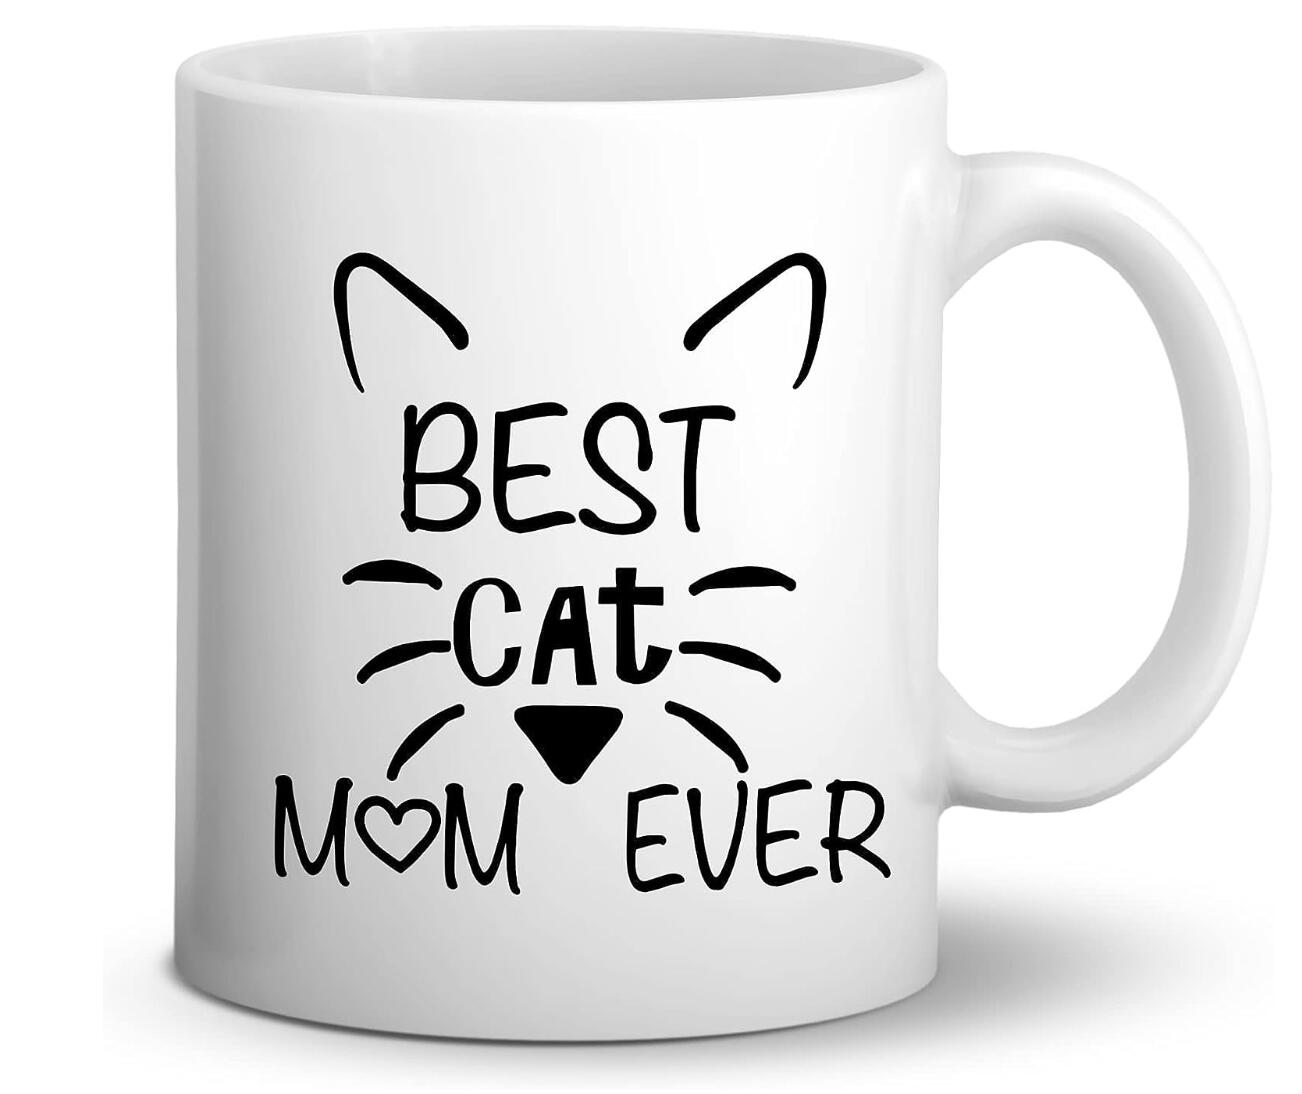 Best Cat Mom Ever Funny Coffee Mug Pet Lovers Gift Cup